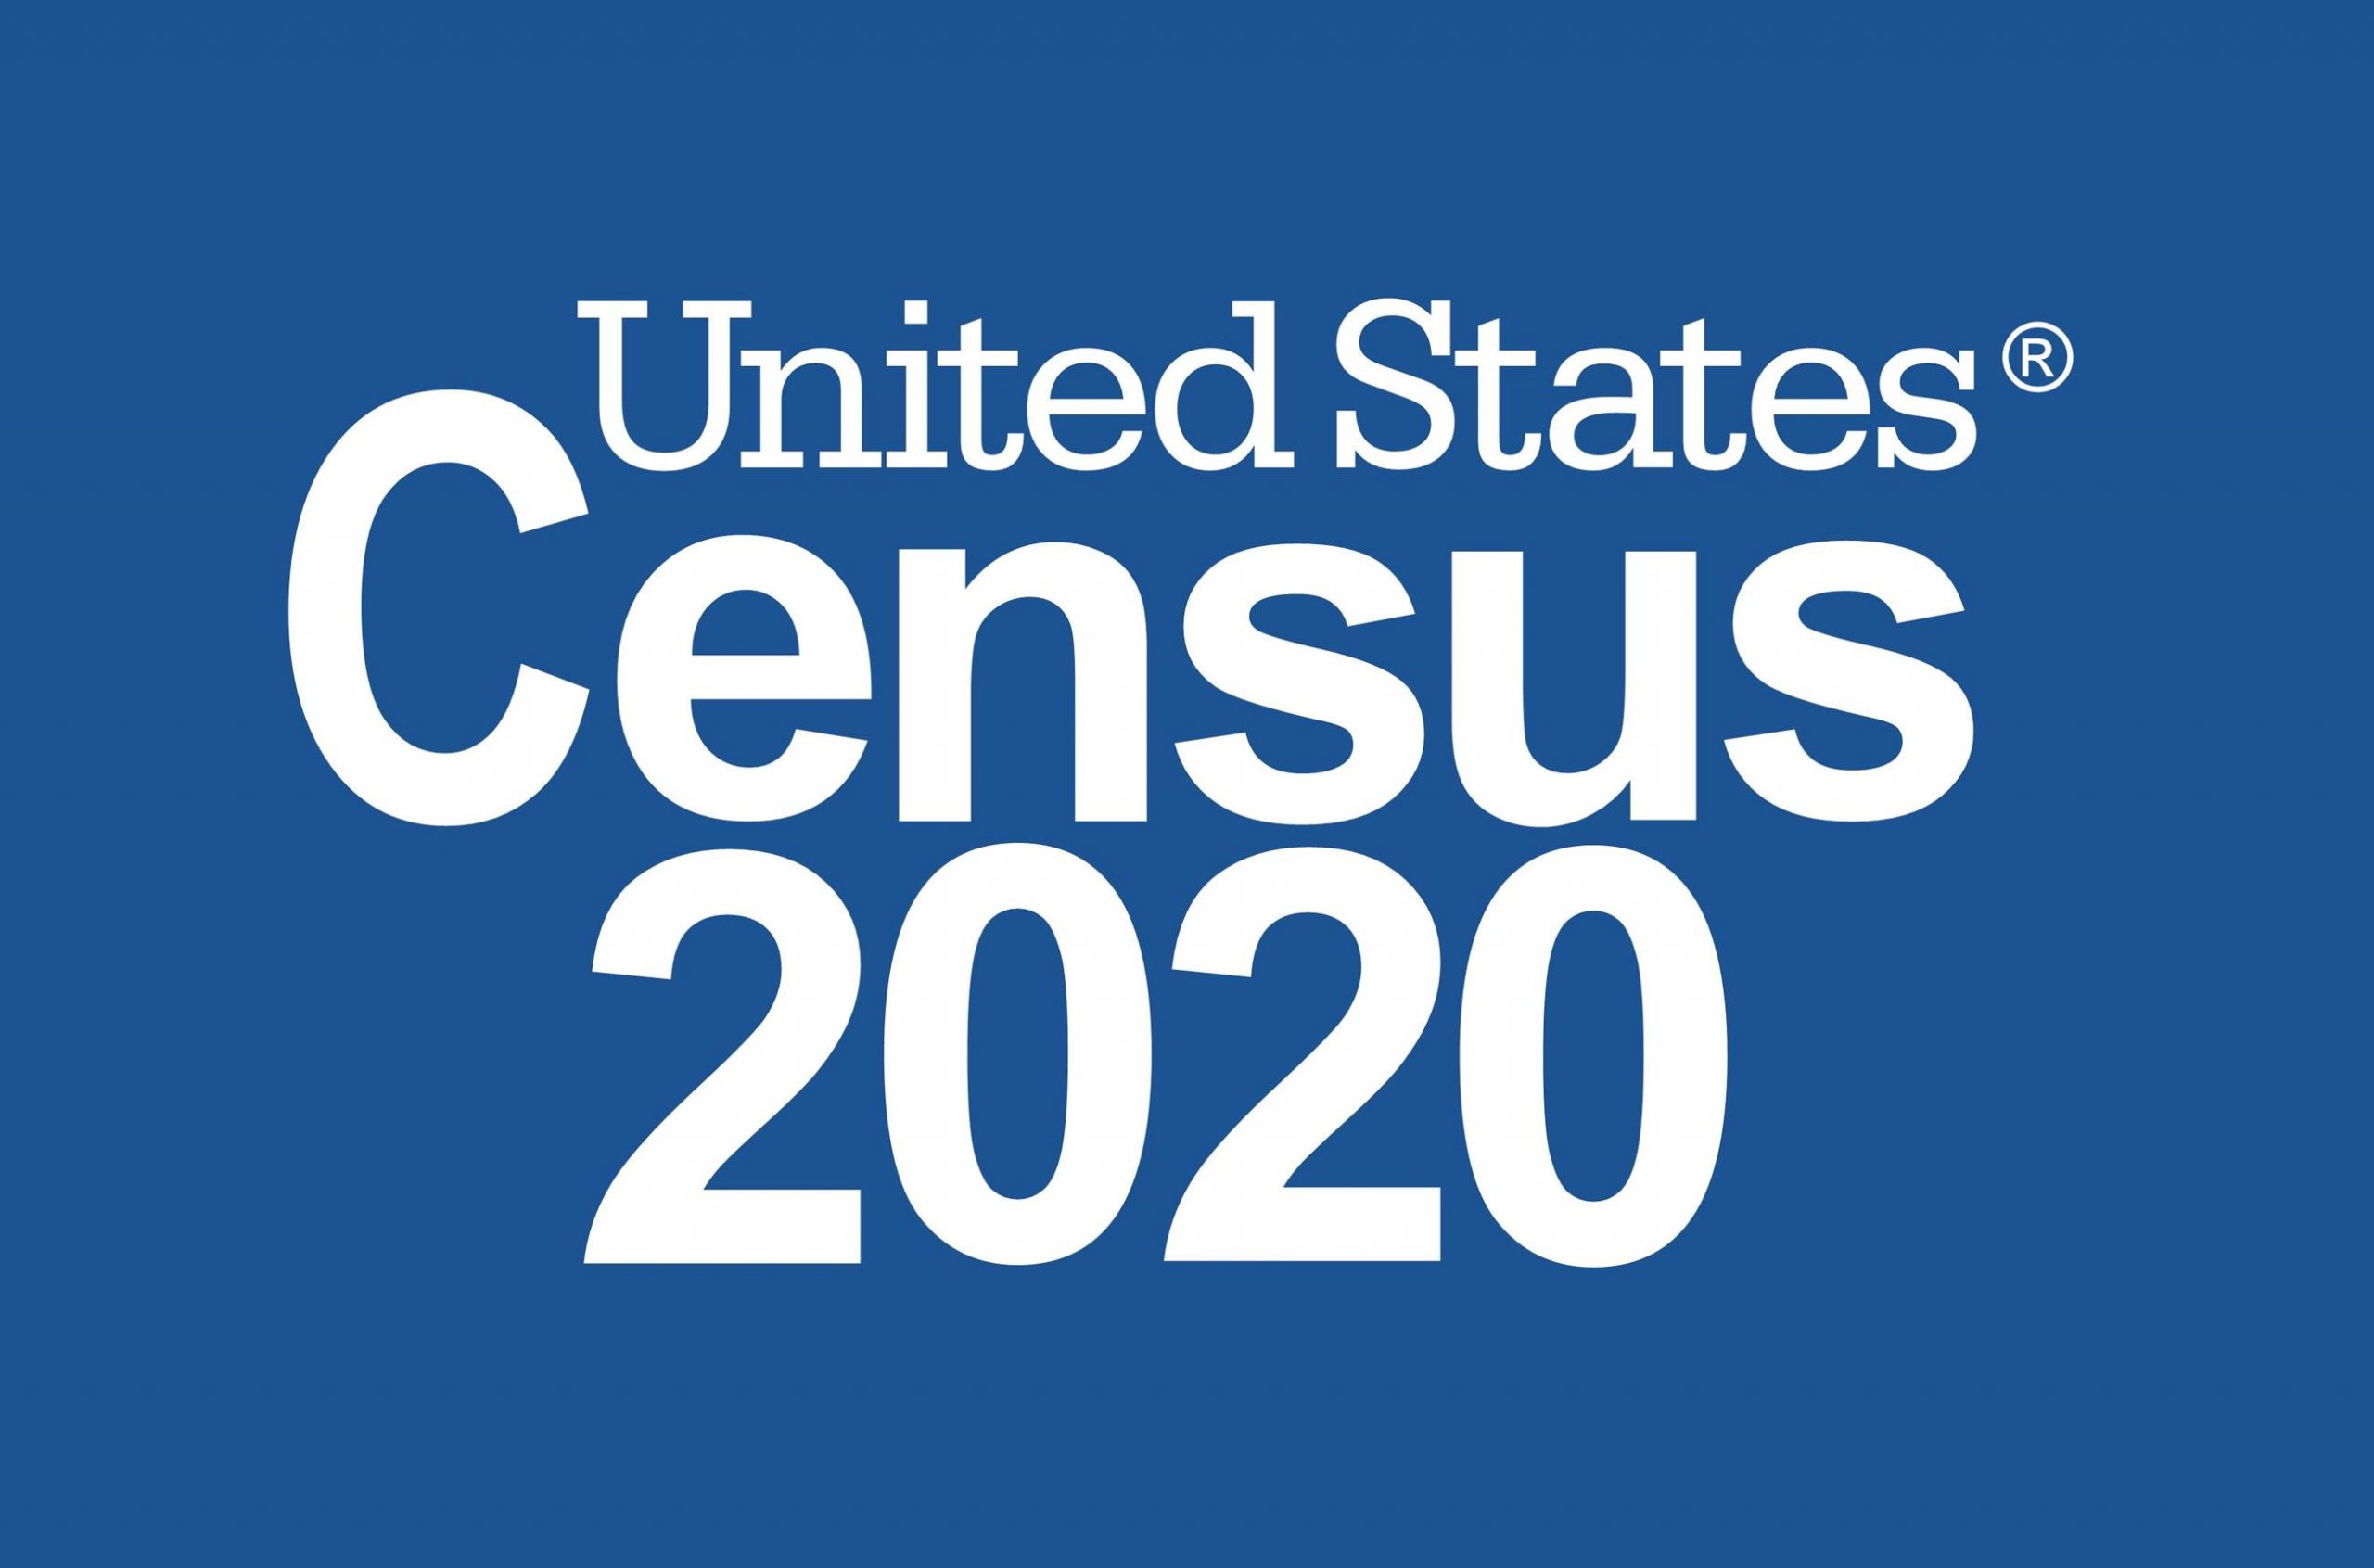 Caribbean american and the 2020 census